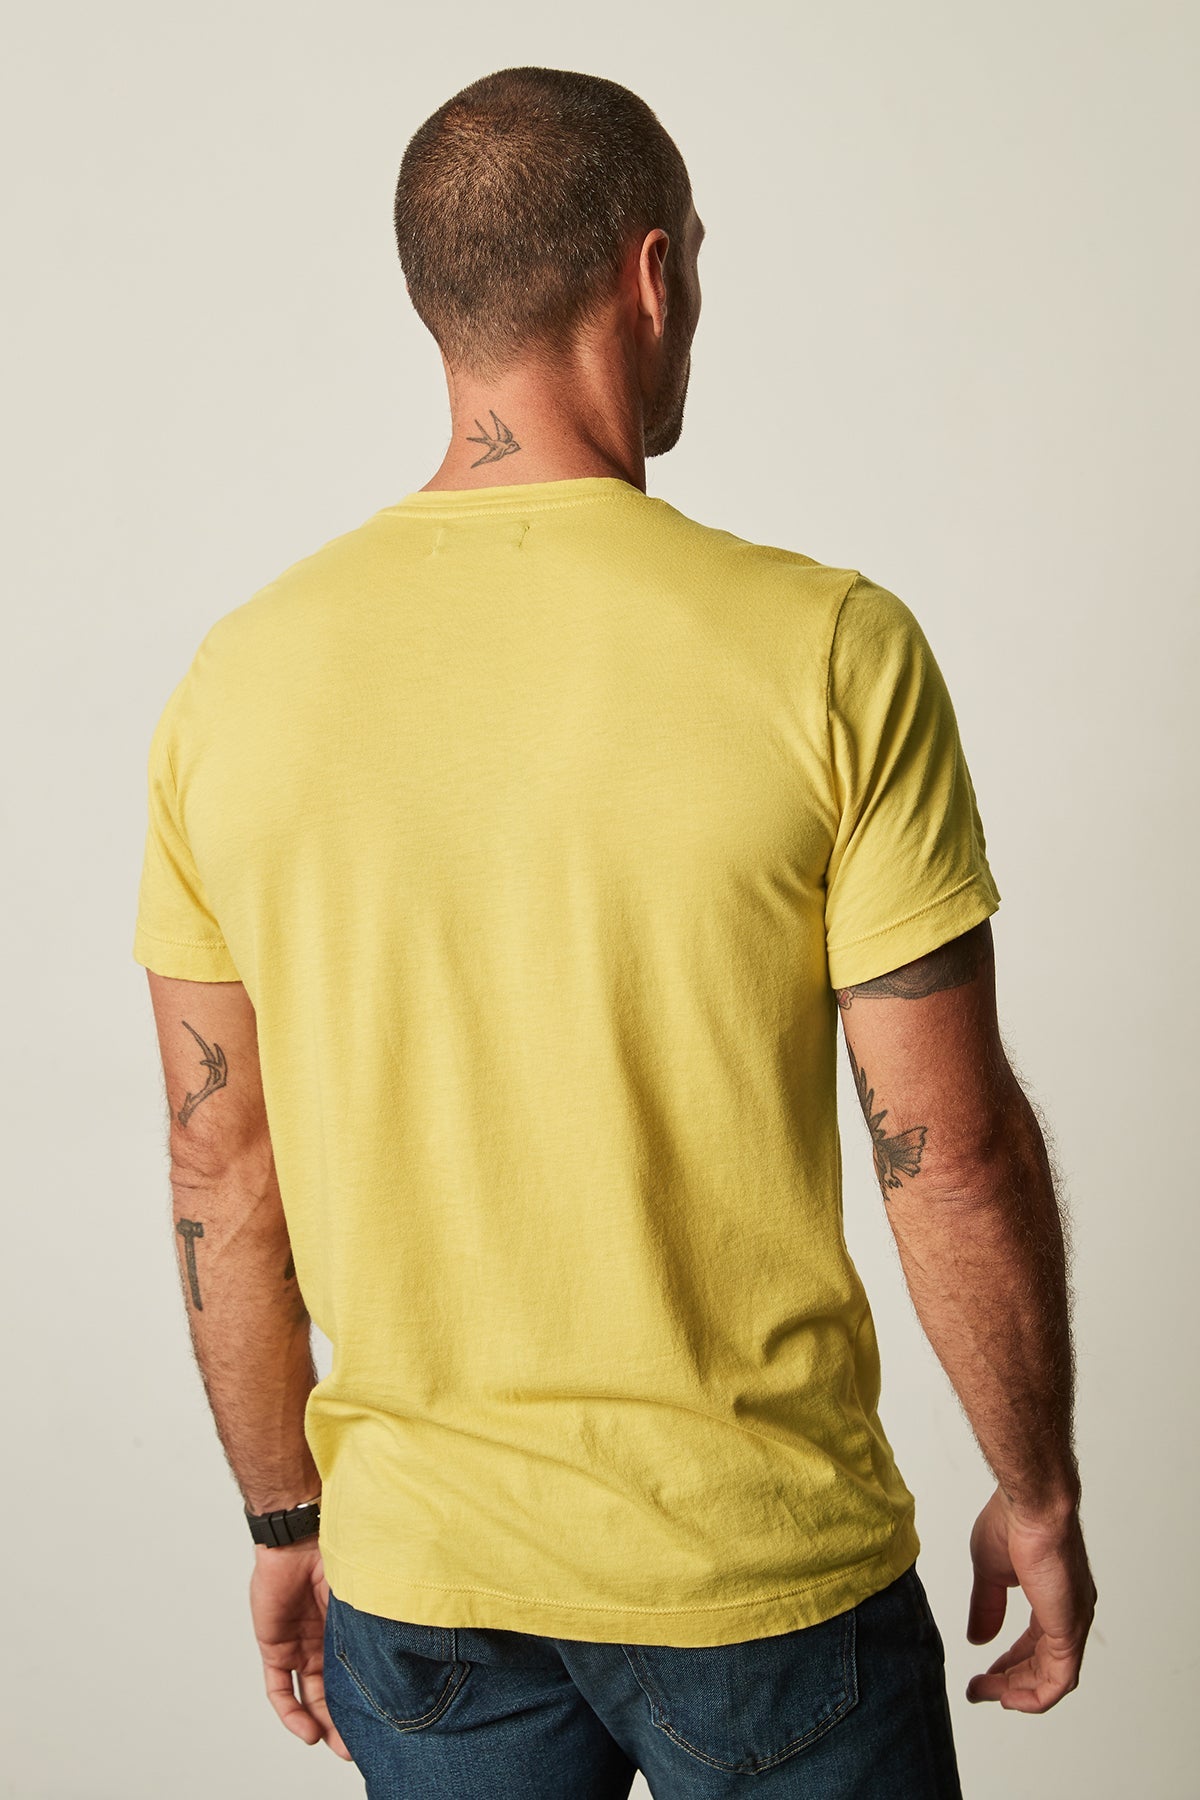 The back view of a man wearing a Velvet by Graham & Spencer HOWARD WHISPER CLASSIC CREW NECK TEE.-25793660682433